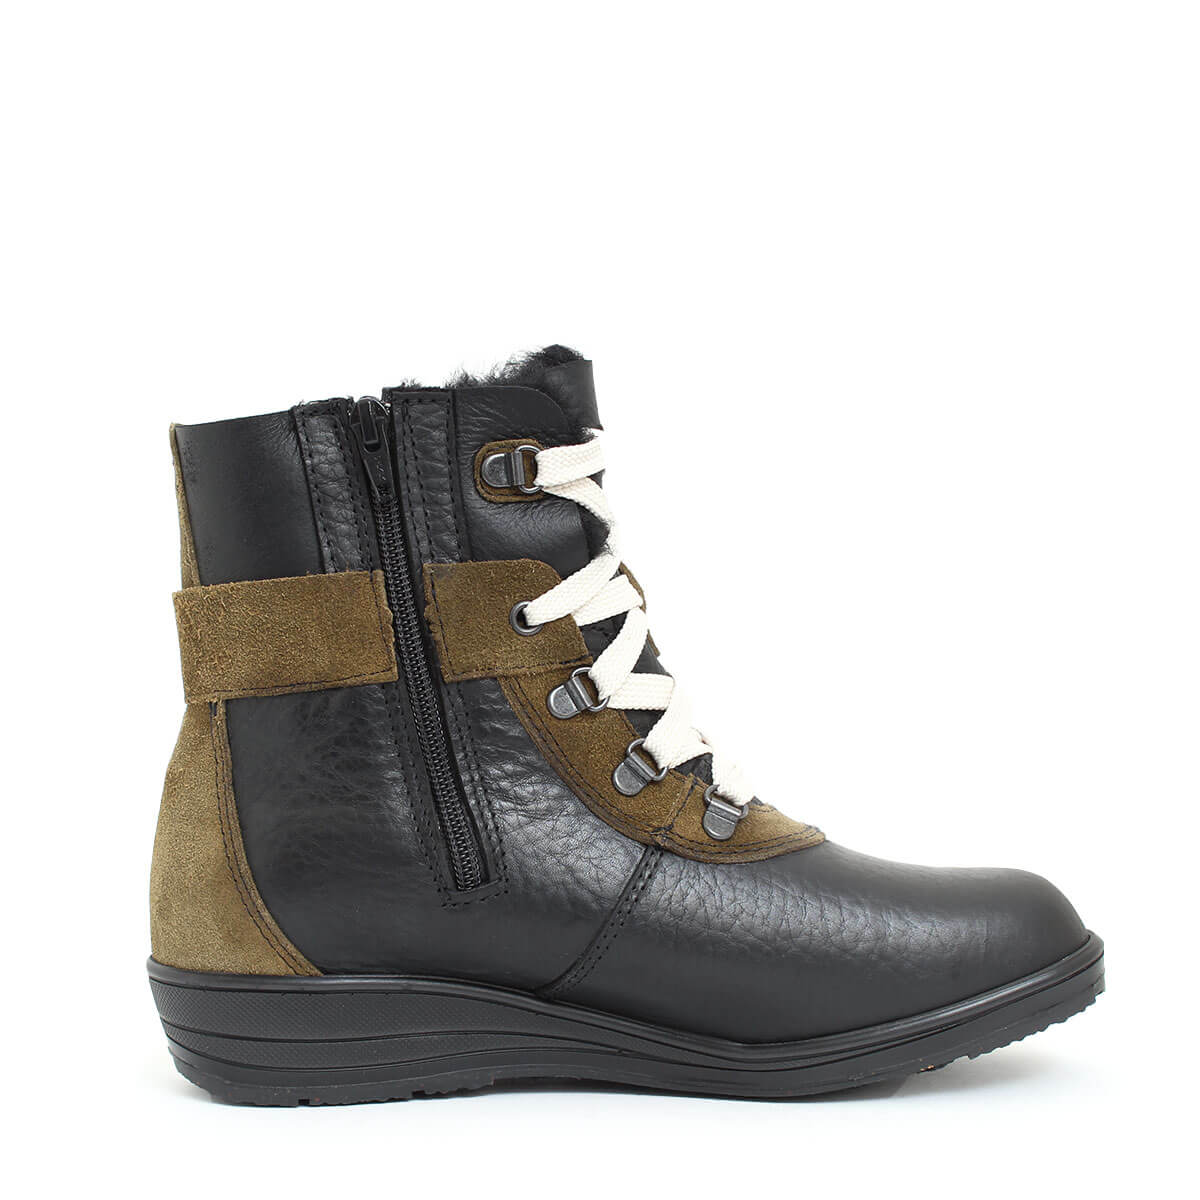 Maria winter Boot for Women